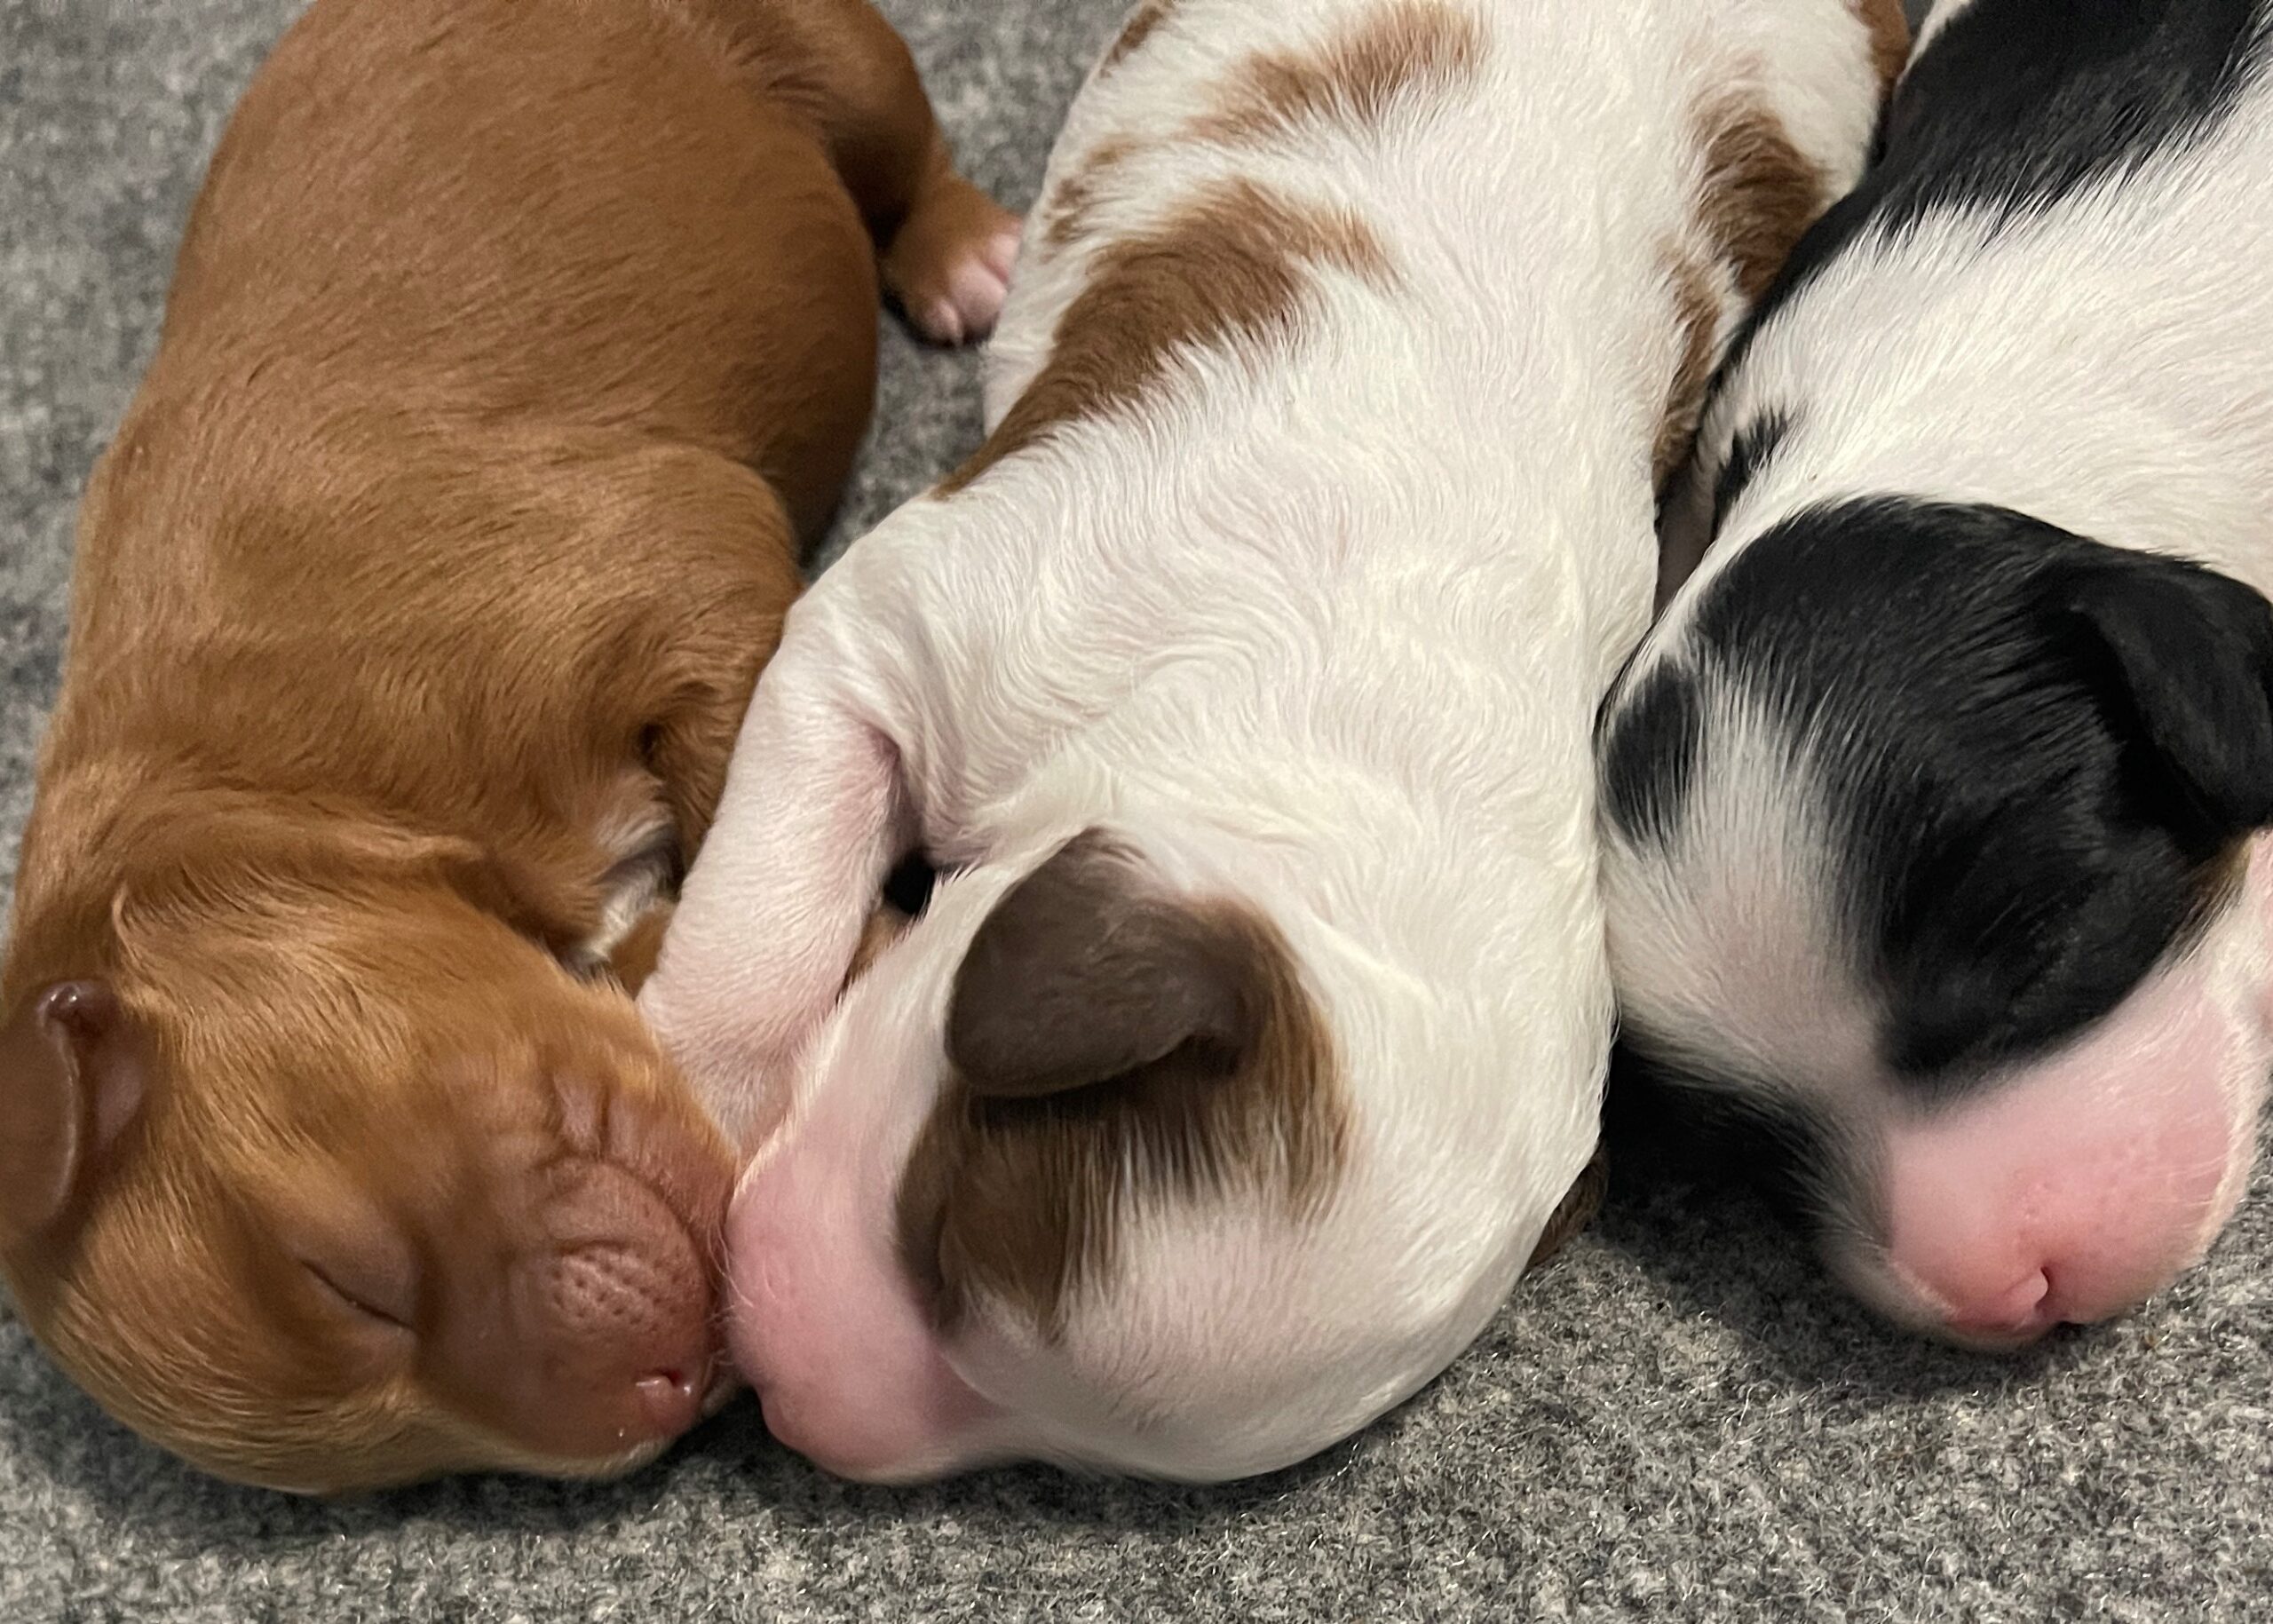 All three puppies in a line sleeping with their heads towards the camera